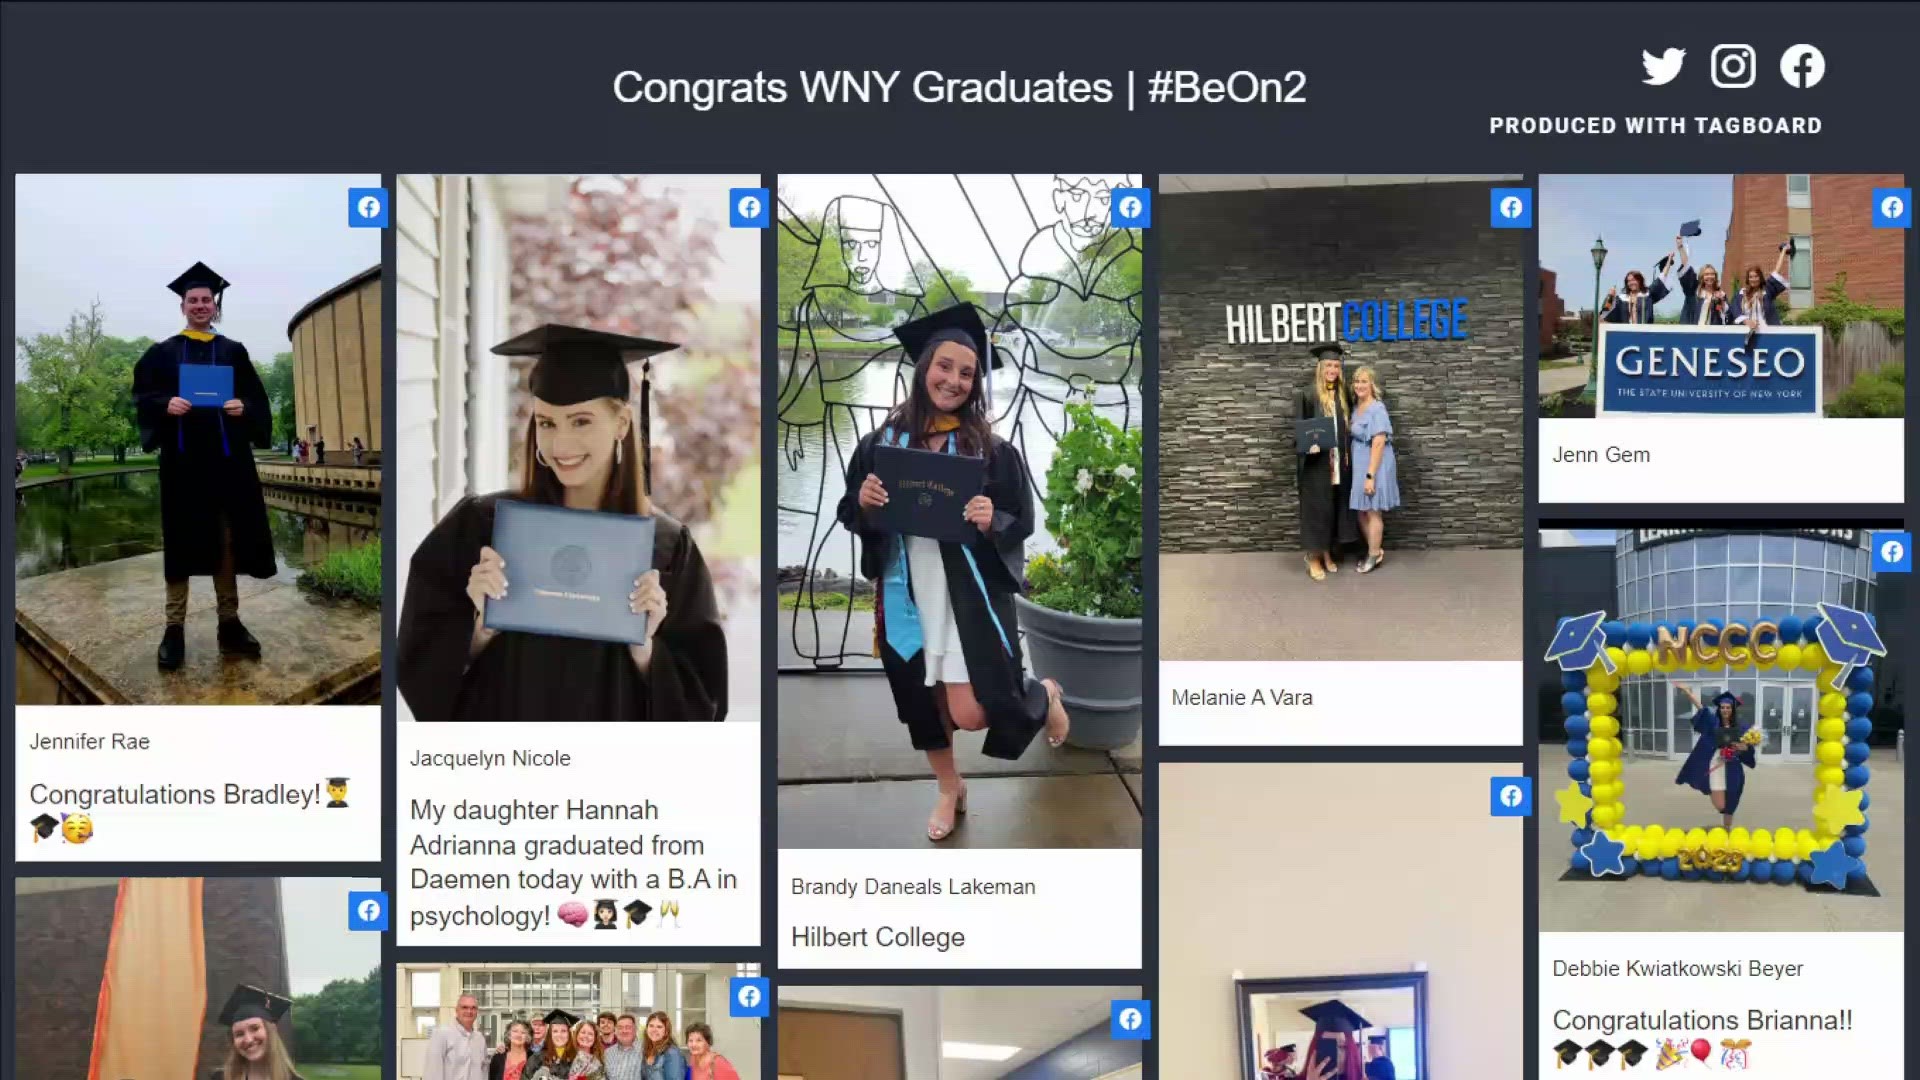 College graduation day across WNY today